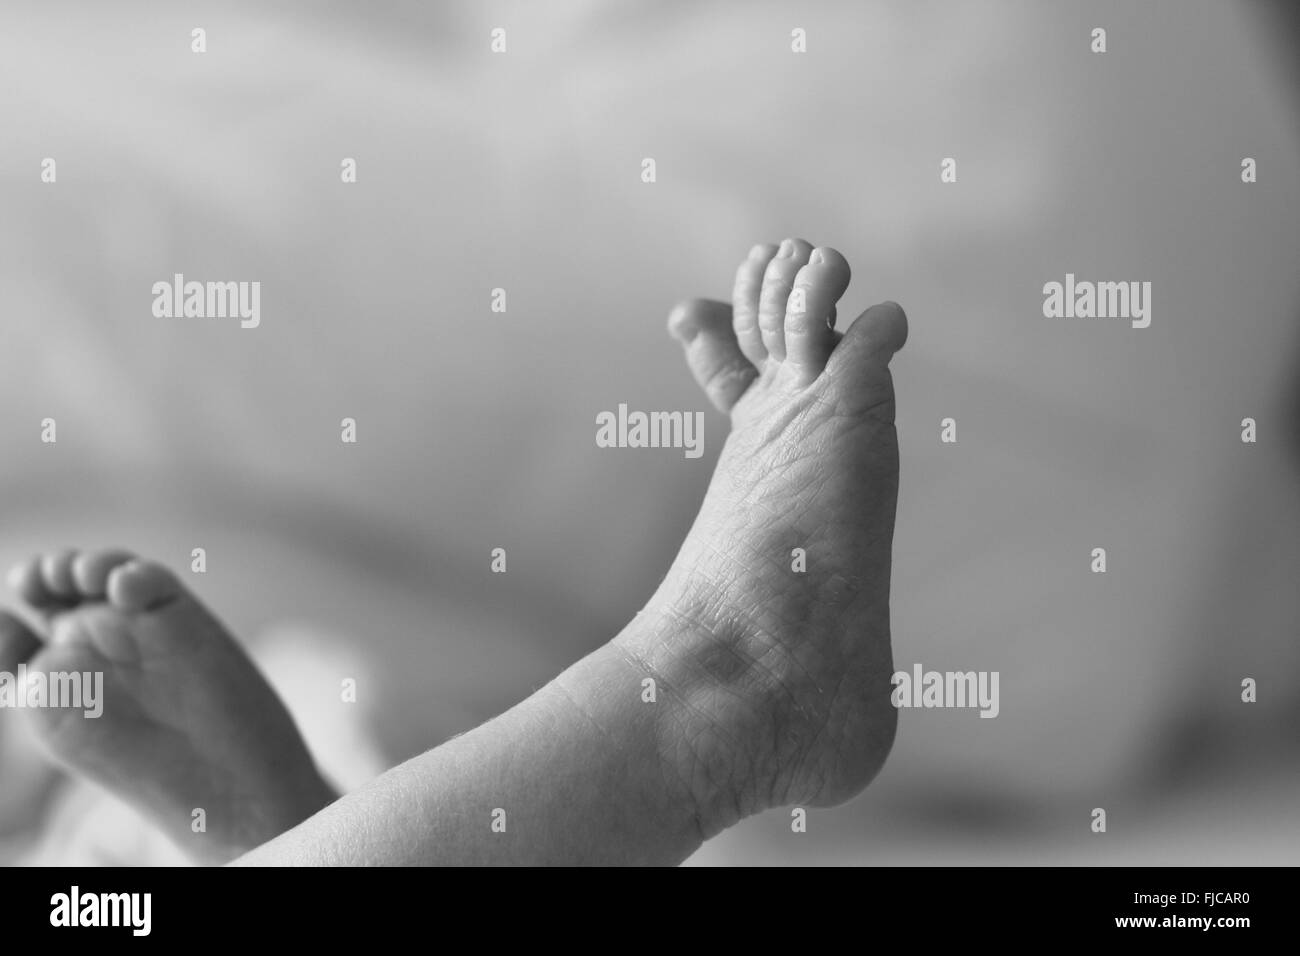 Tiny Newborn feet toes in the air, against a blurred background little girl feet, baby feet, baby toes Stock Photo